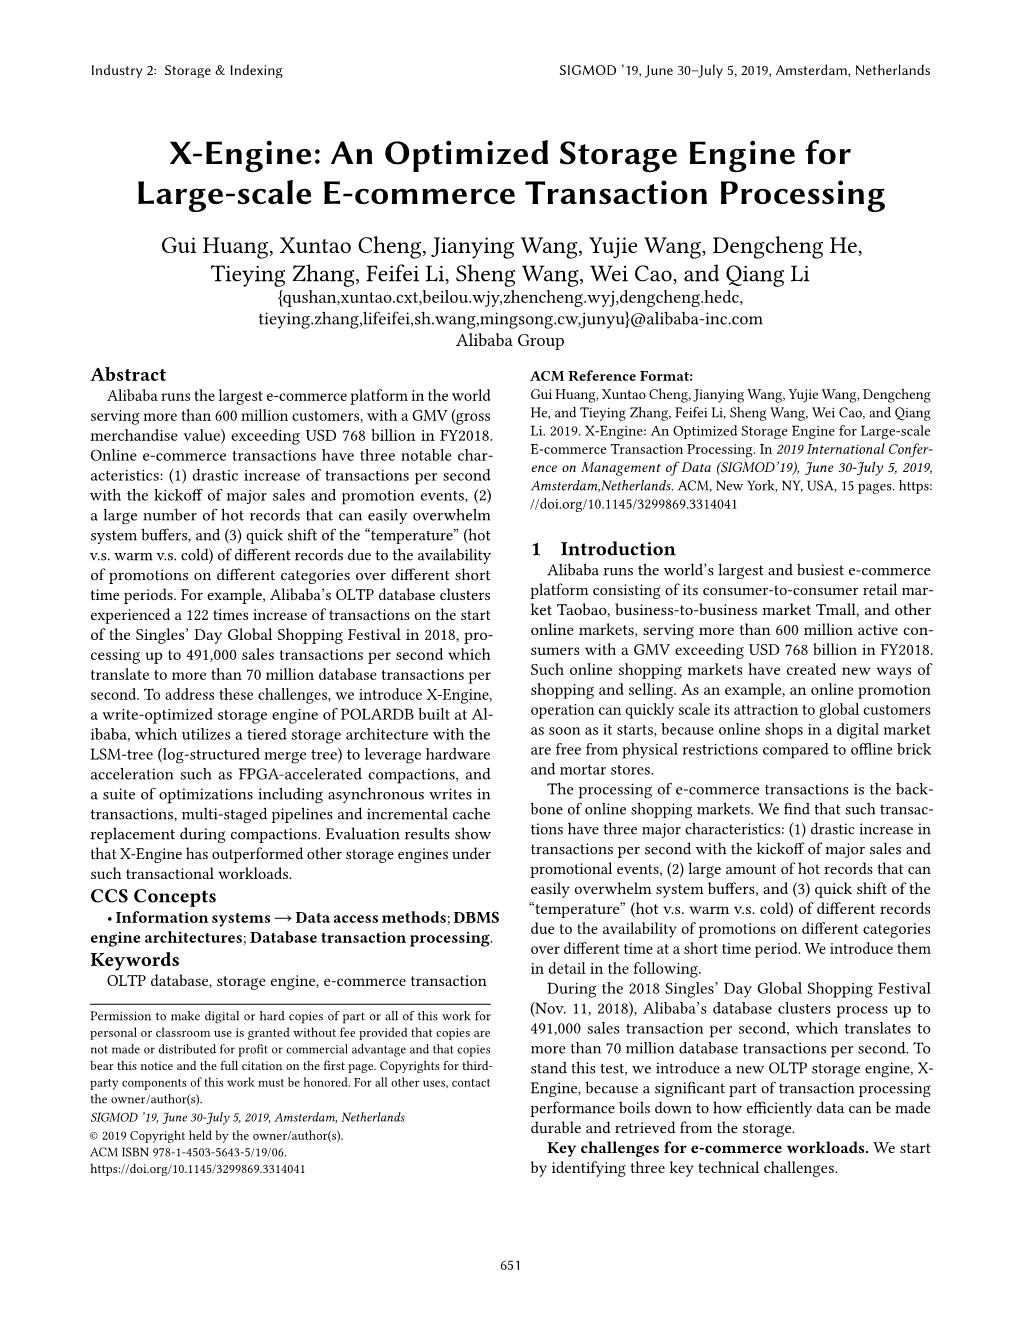 An Optimized Storage Engine for Large-Scale E-Commerce